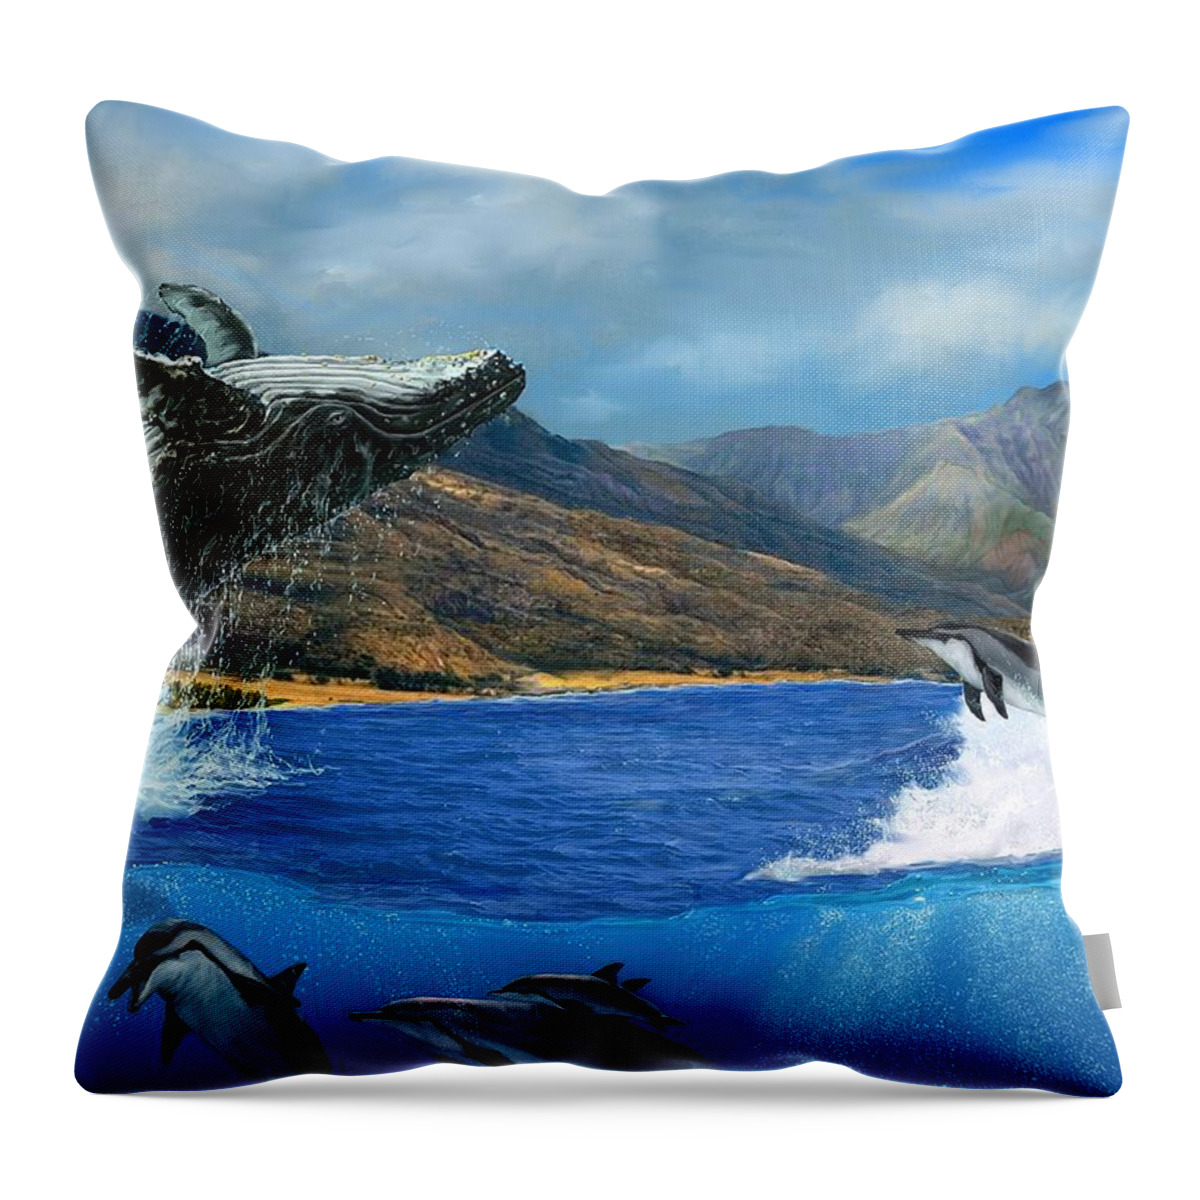 Breaching Throw Pillow featuring the painting Breaching Humpback Whale at West Maui by Stephen Jorgensen